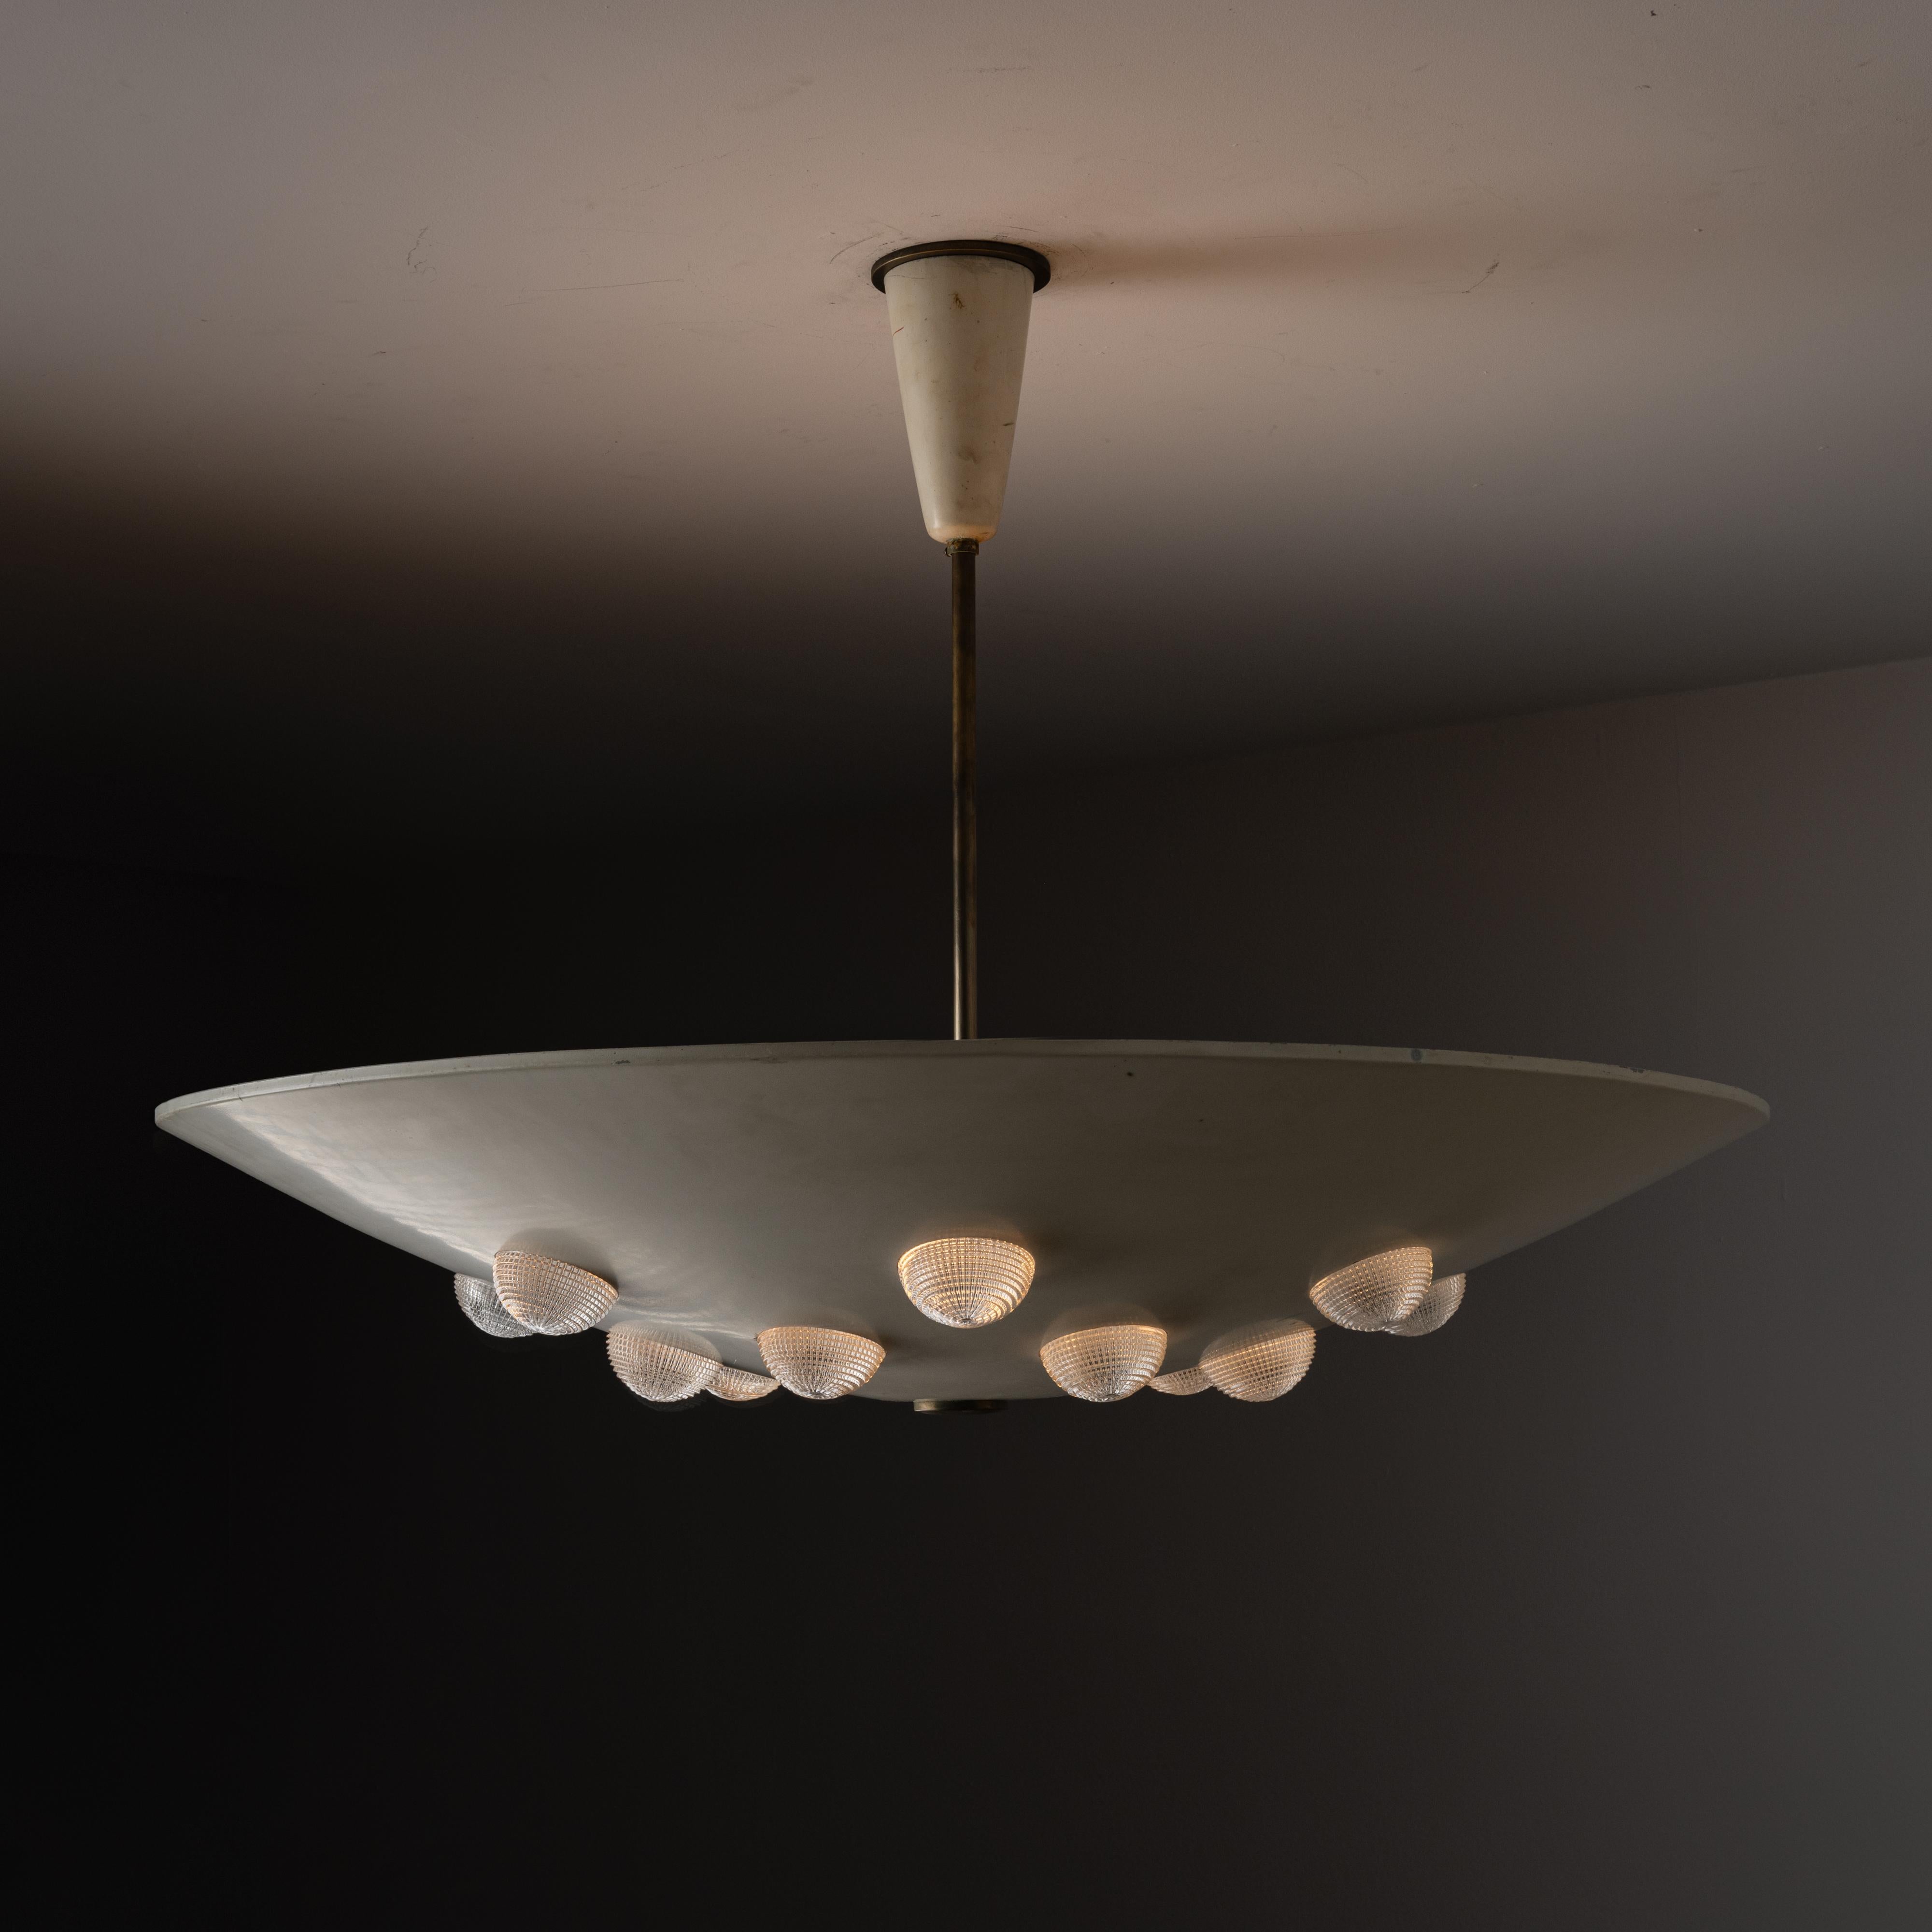 Ceiling Light by Stilnovo. Designed and manufactured in Italy, circa the 1960s. A large enameled dish in a bone color. The dish has stamped circles all around, allowing for small texturized glass lenses to sit in them for light diffusion. This light